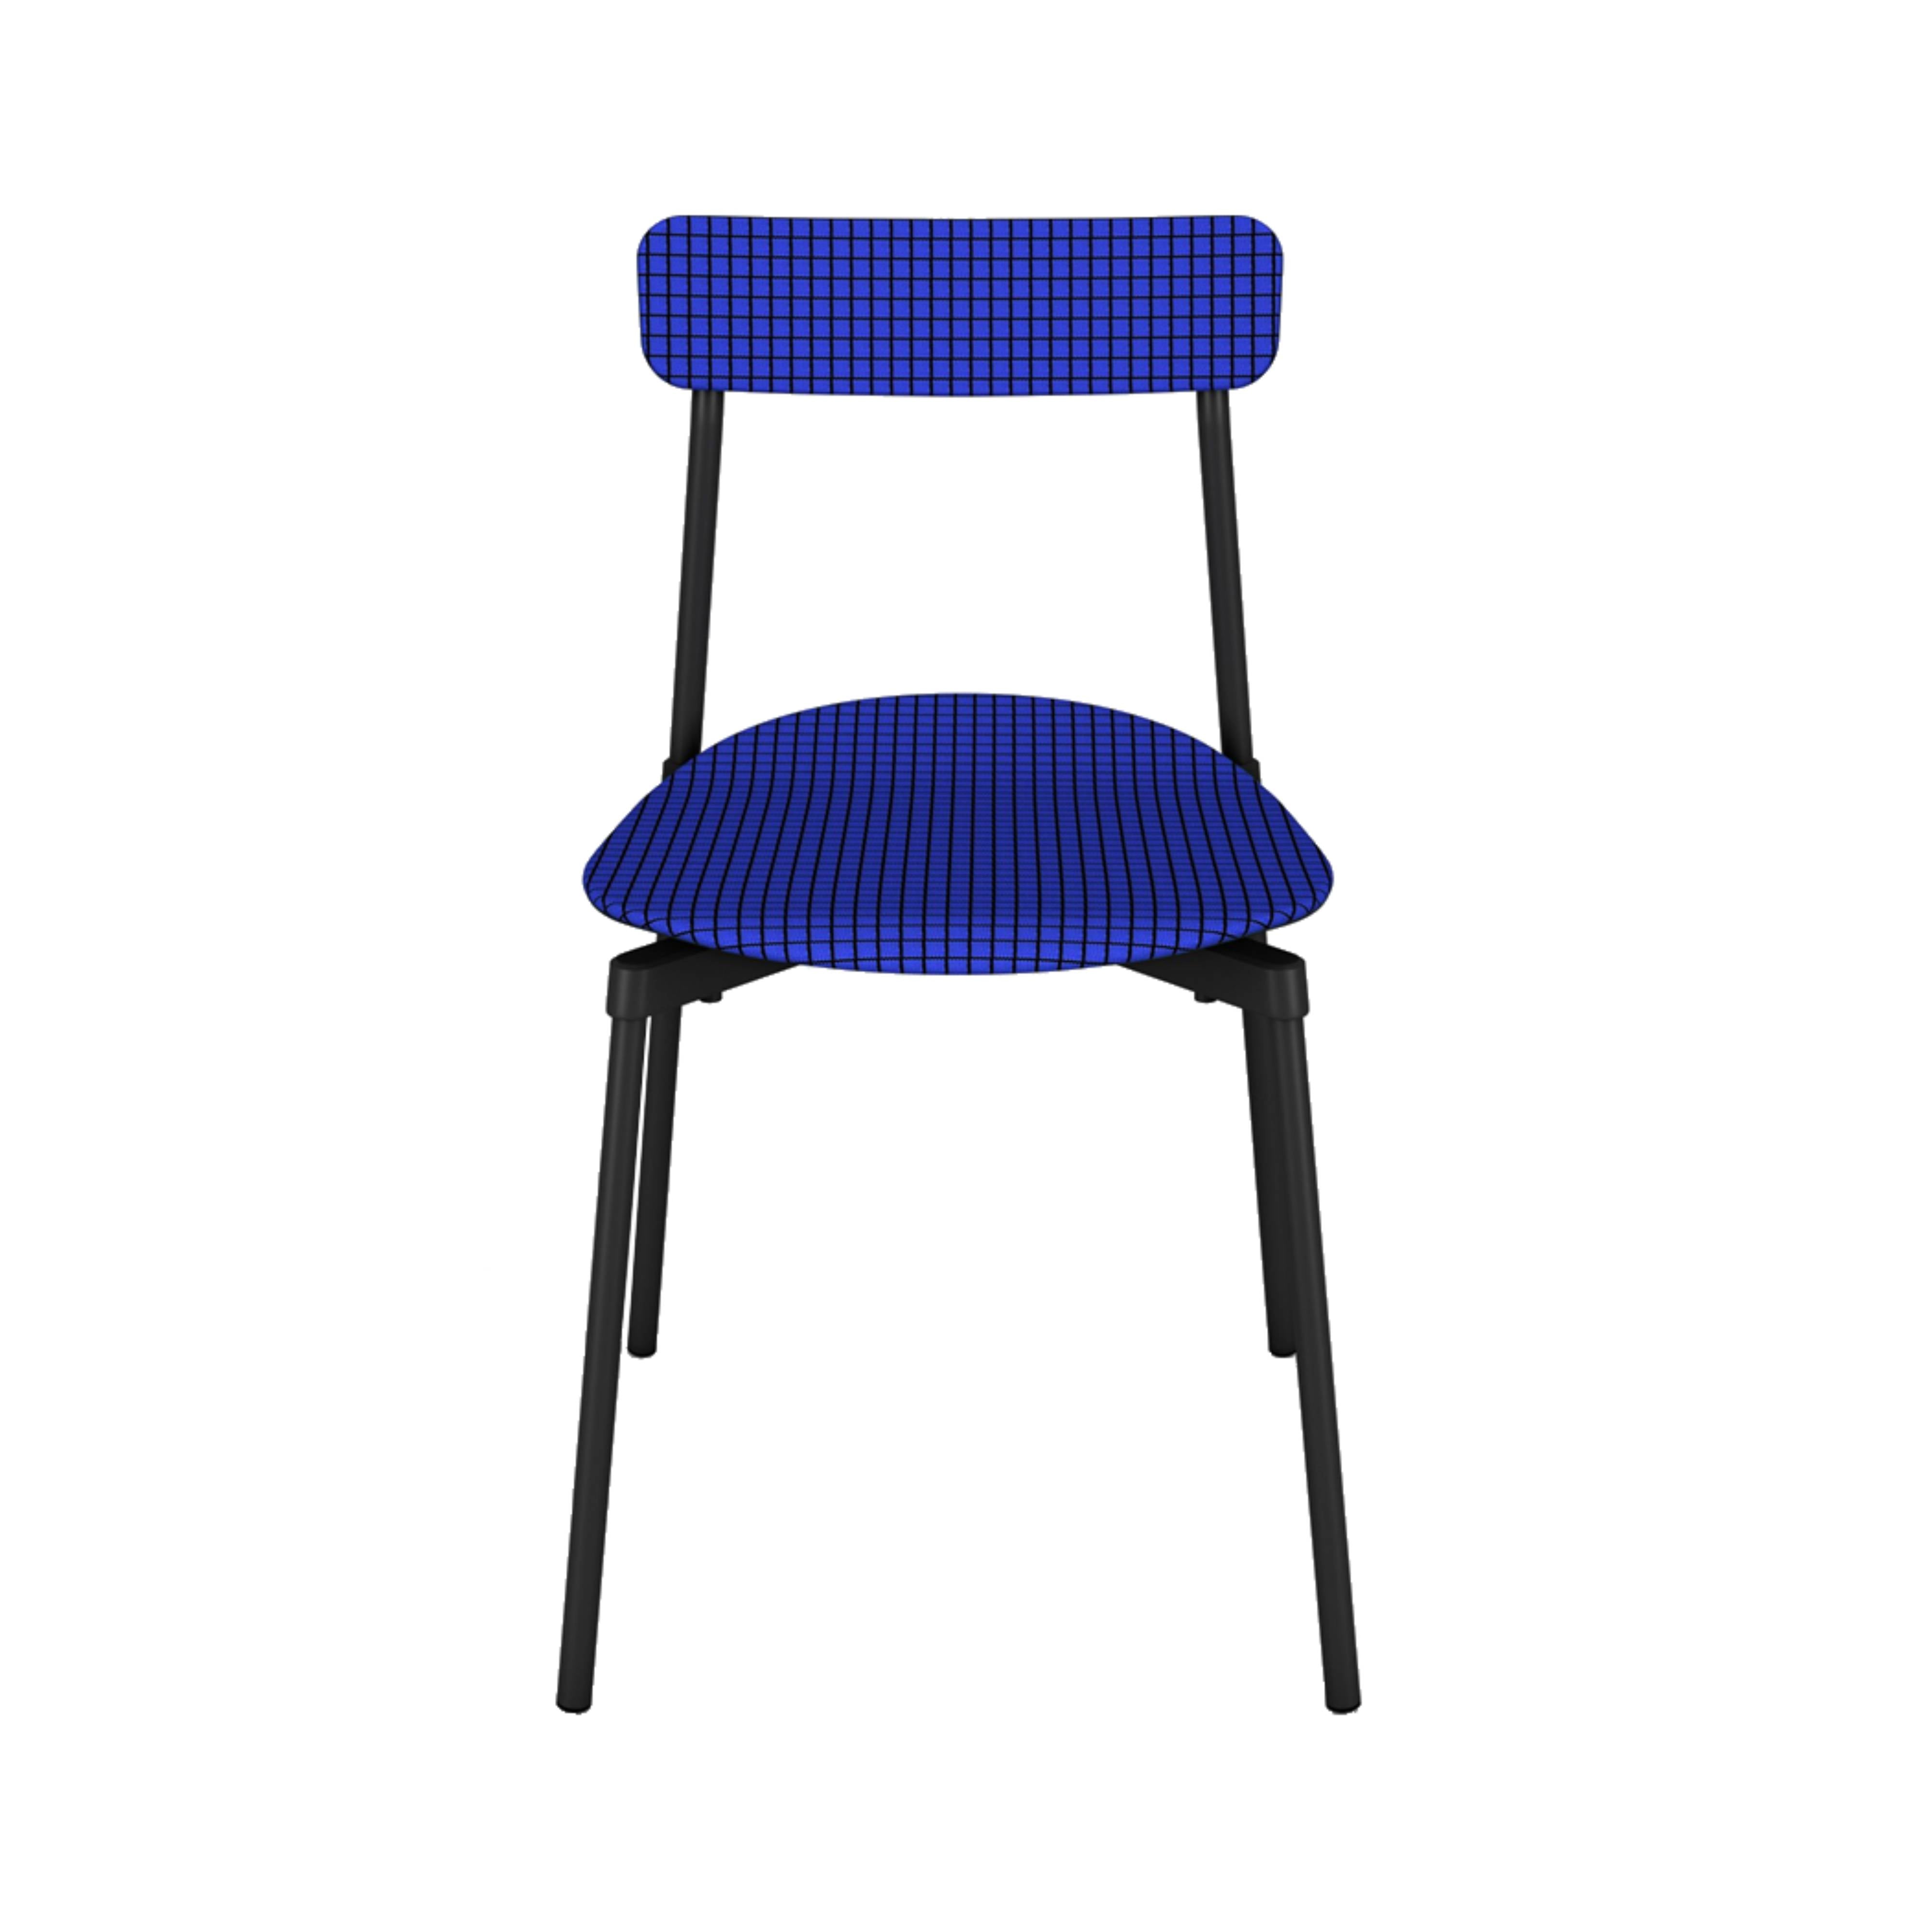 Fromme Soft Chair: Blue + Black Line